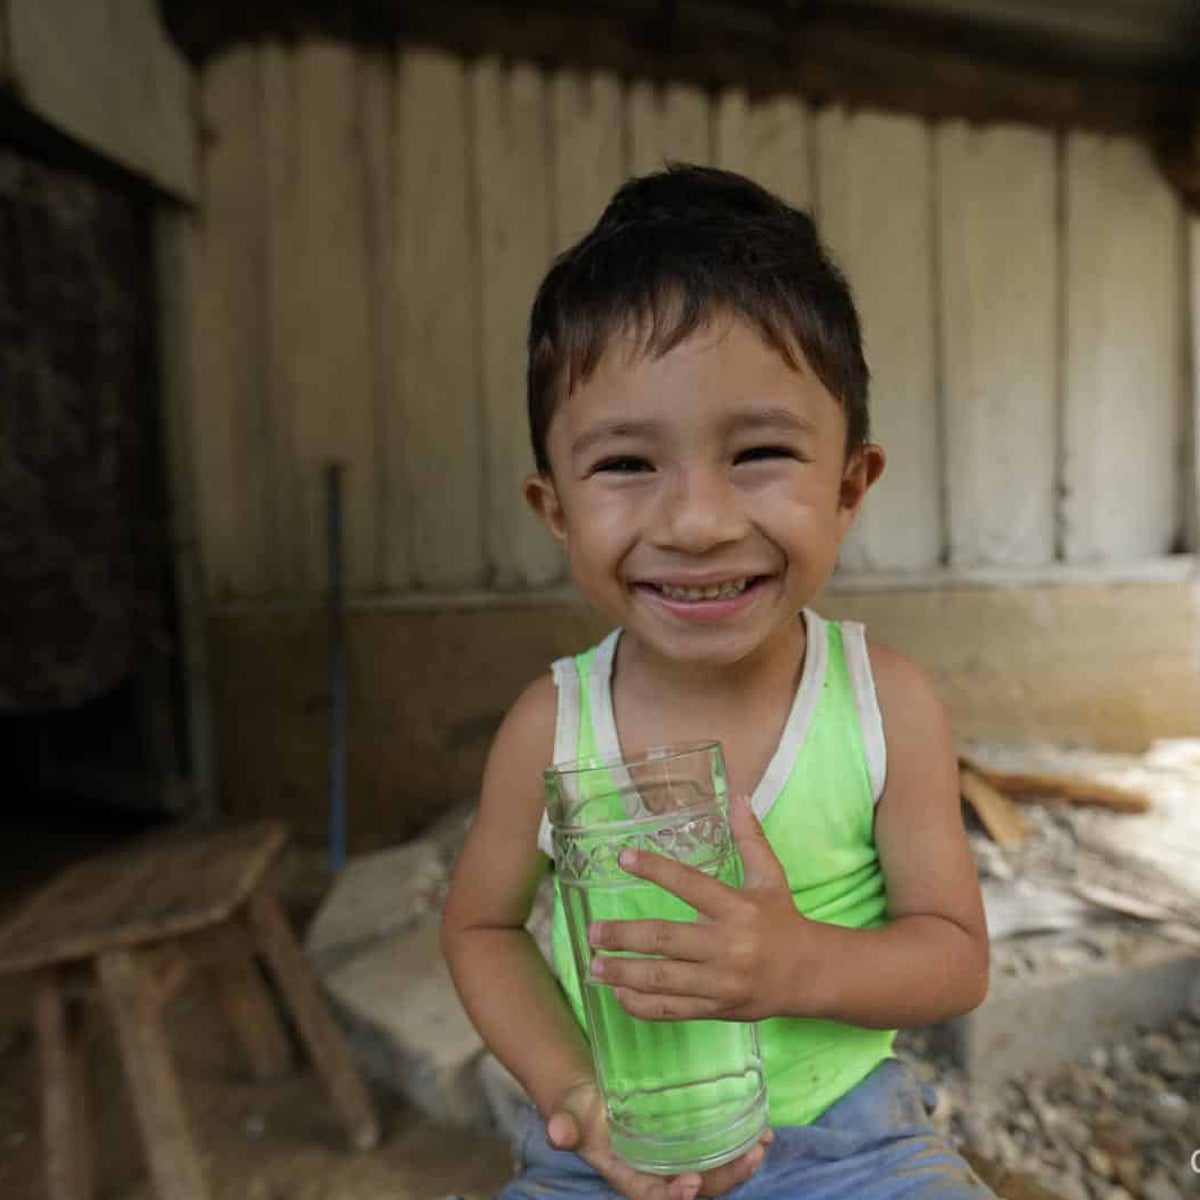 A young boy holds a water cup. Operation Blessing brings life to dry places.